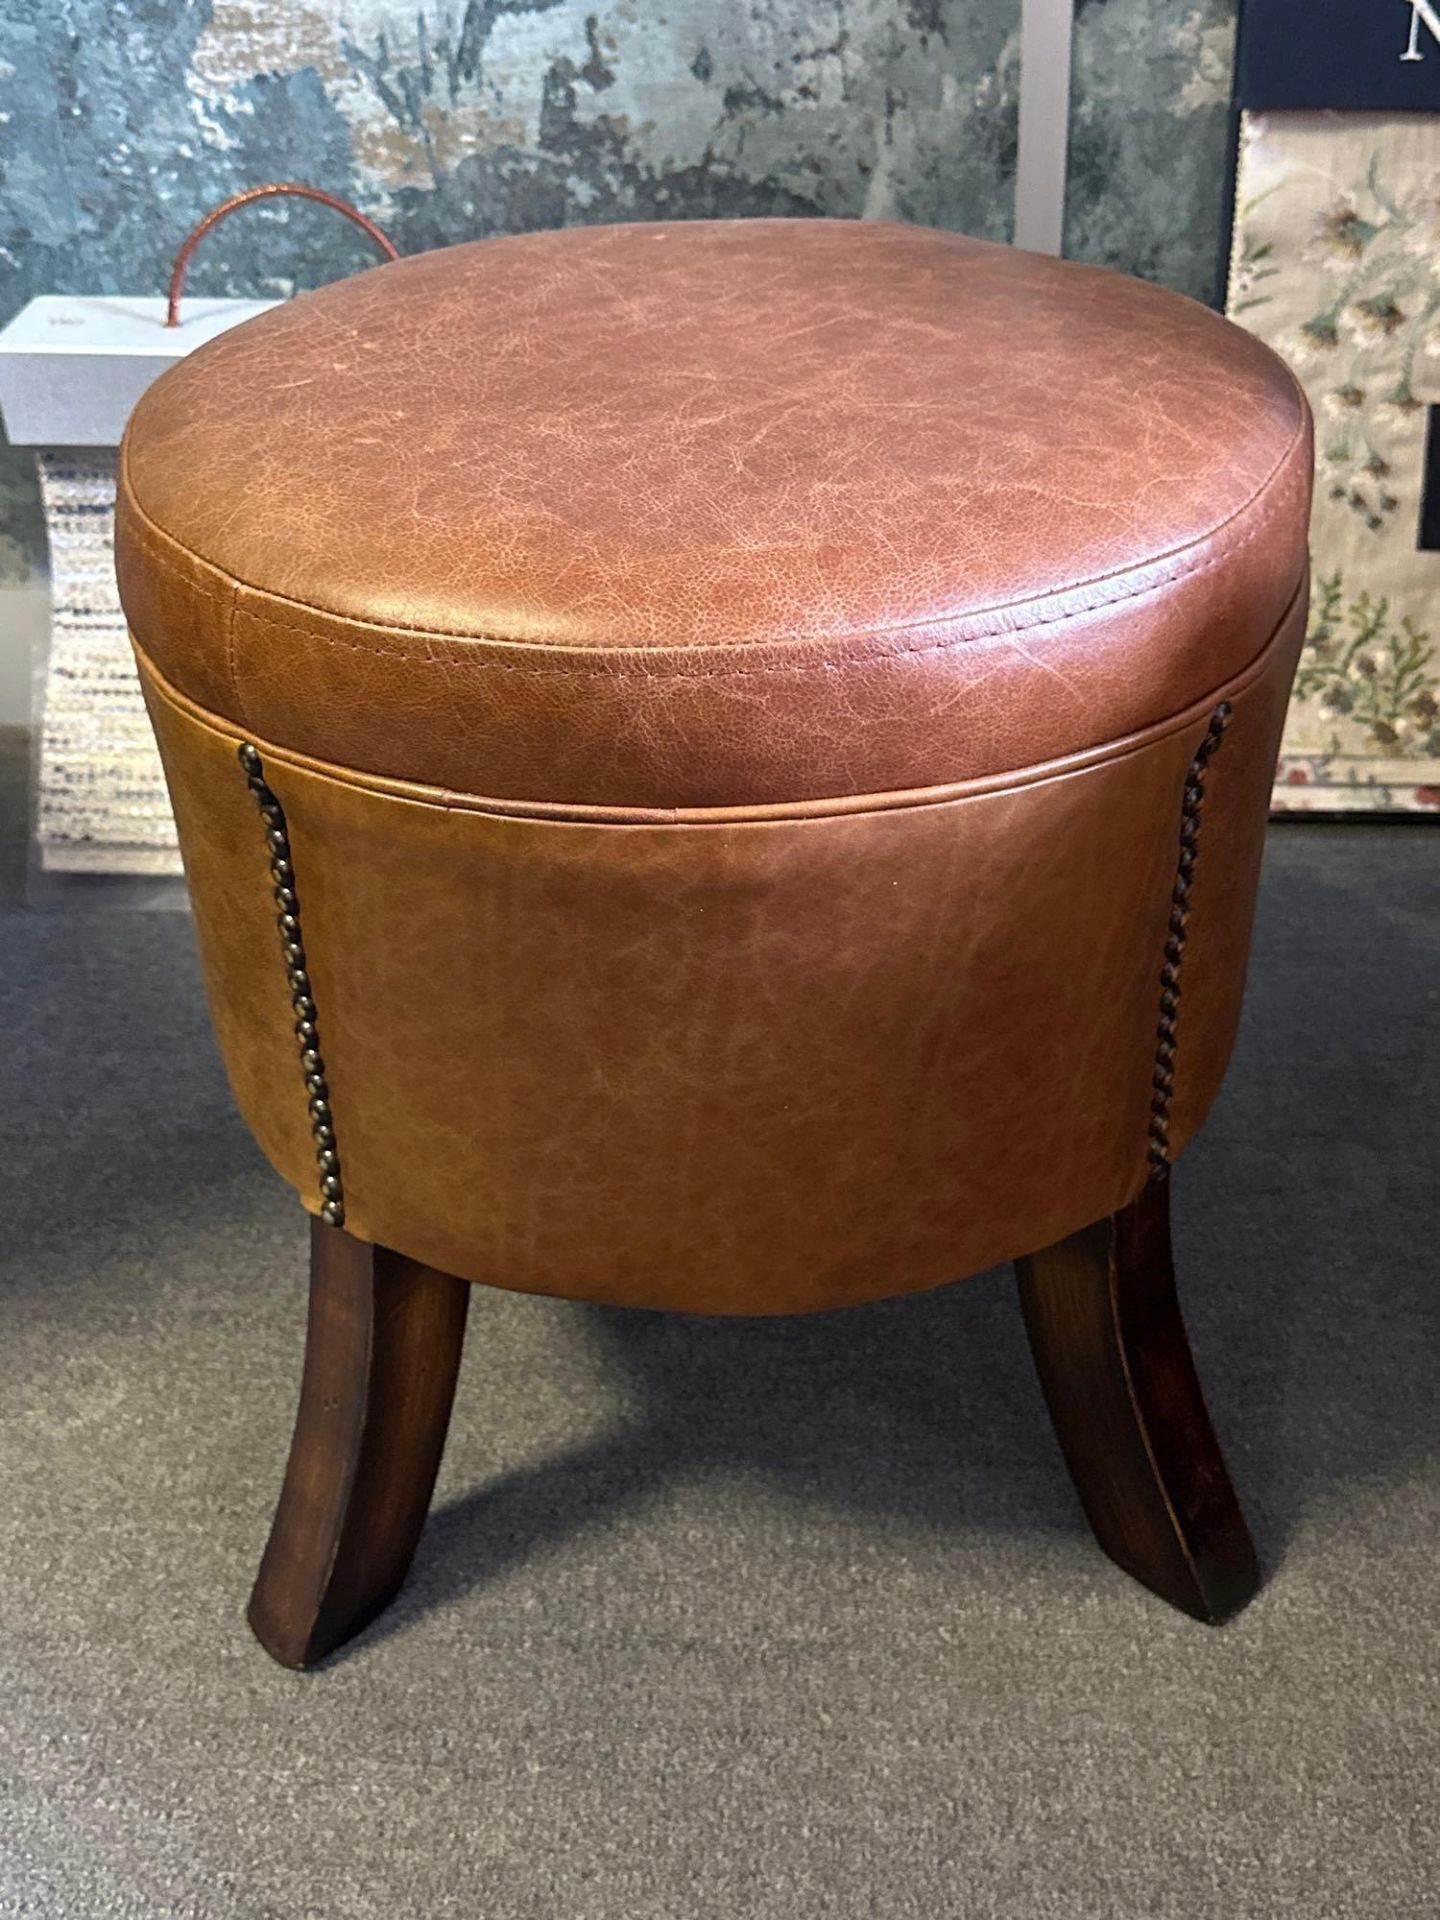 Barrington Leather Footstool: A Touch Of Timeless Elegance Elevate Your Living Space With The